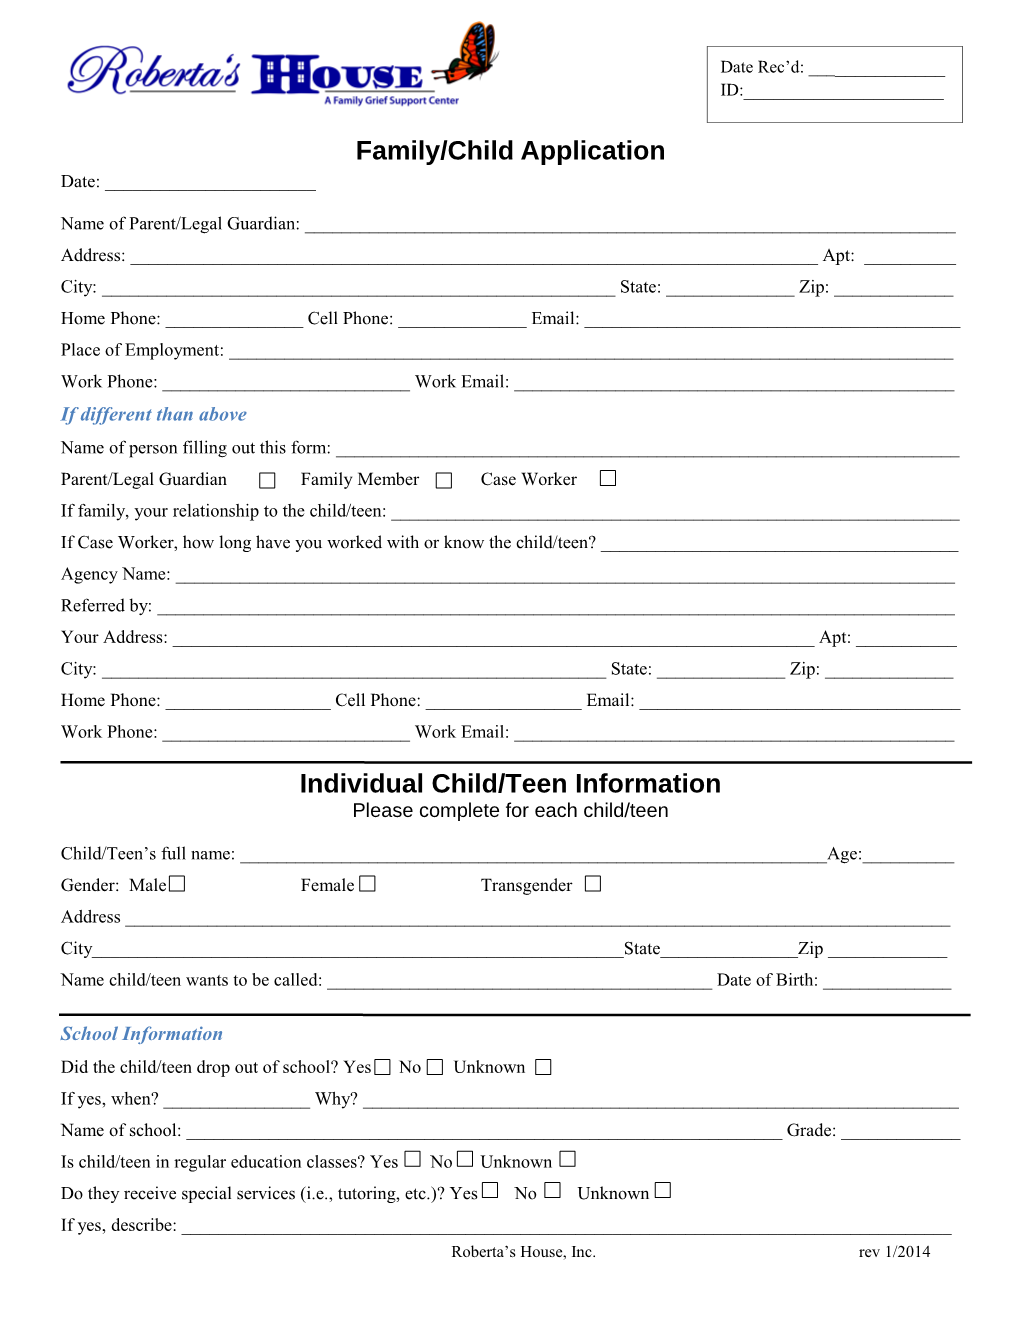 Family/Child Application